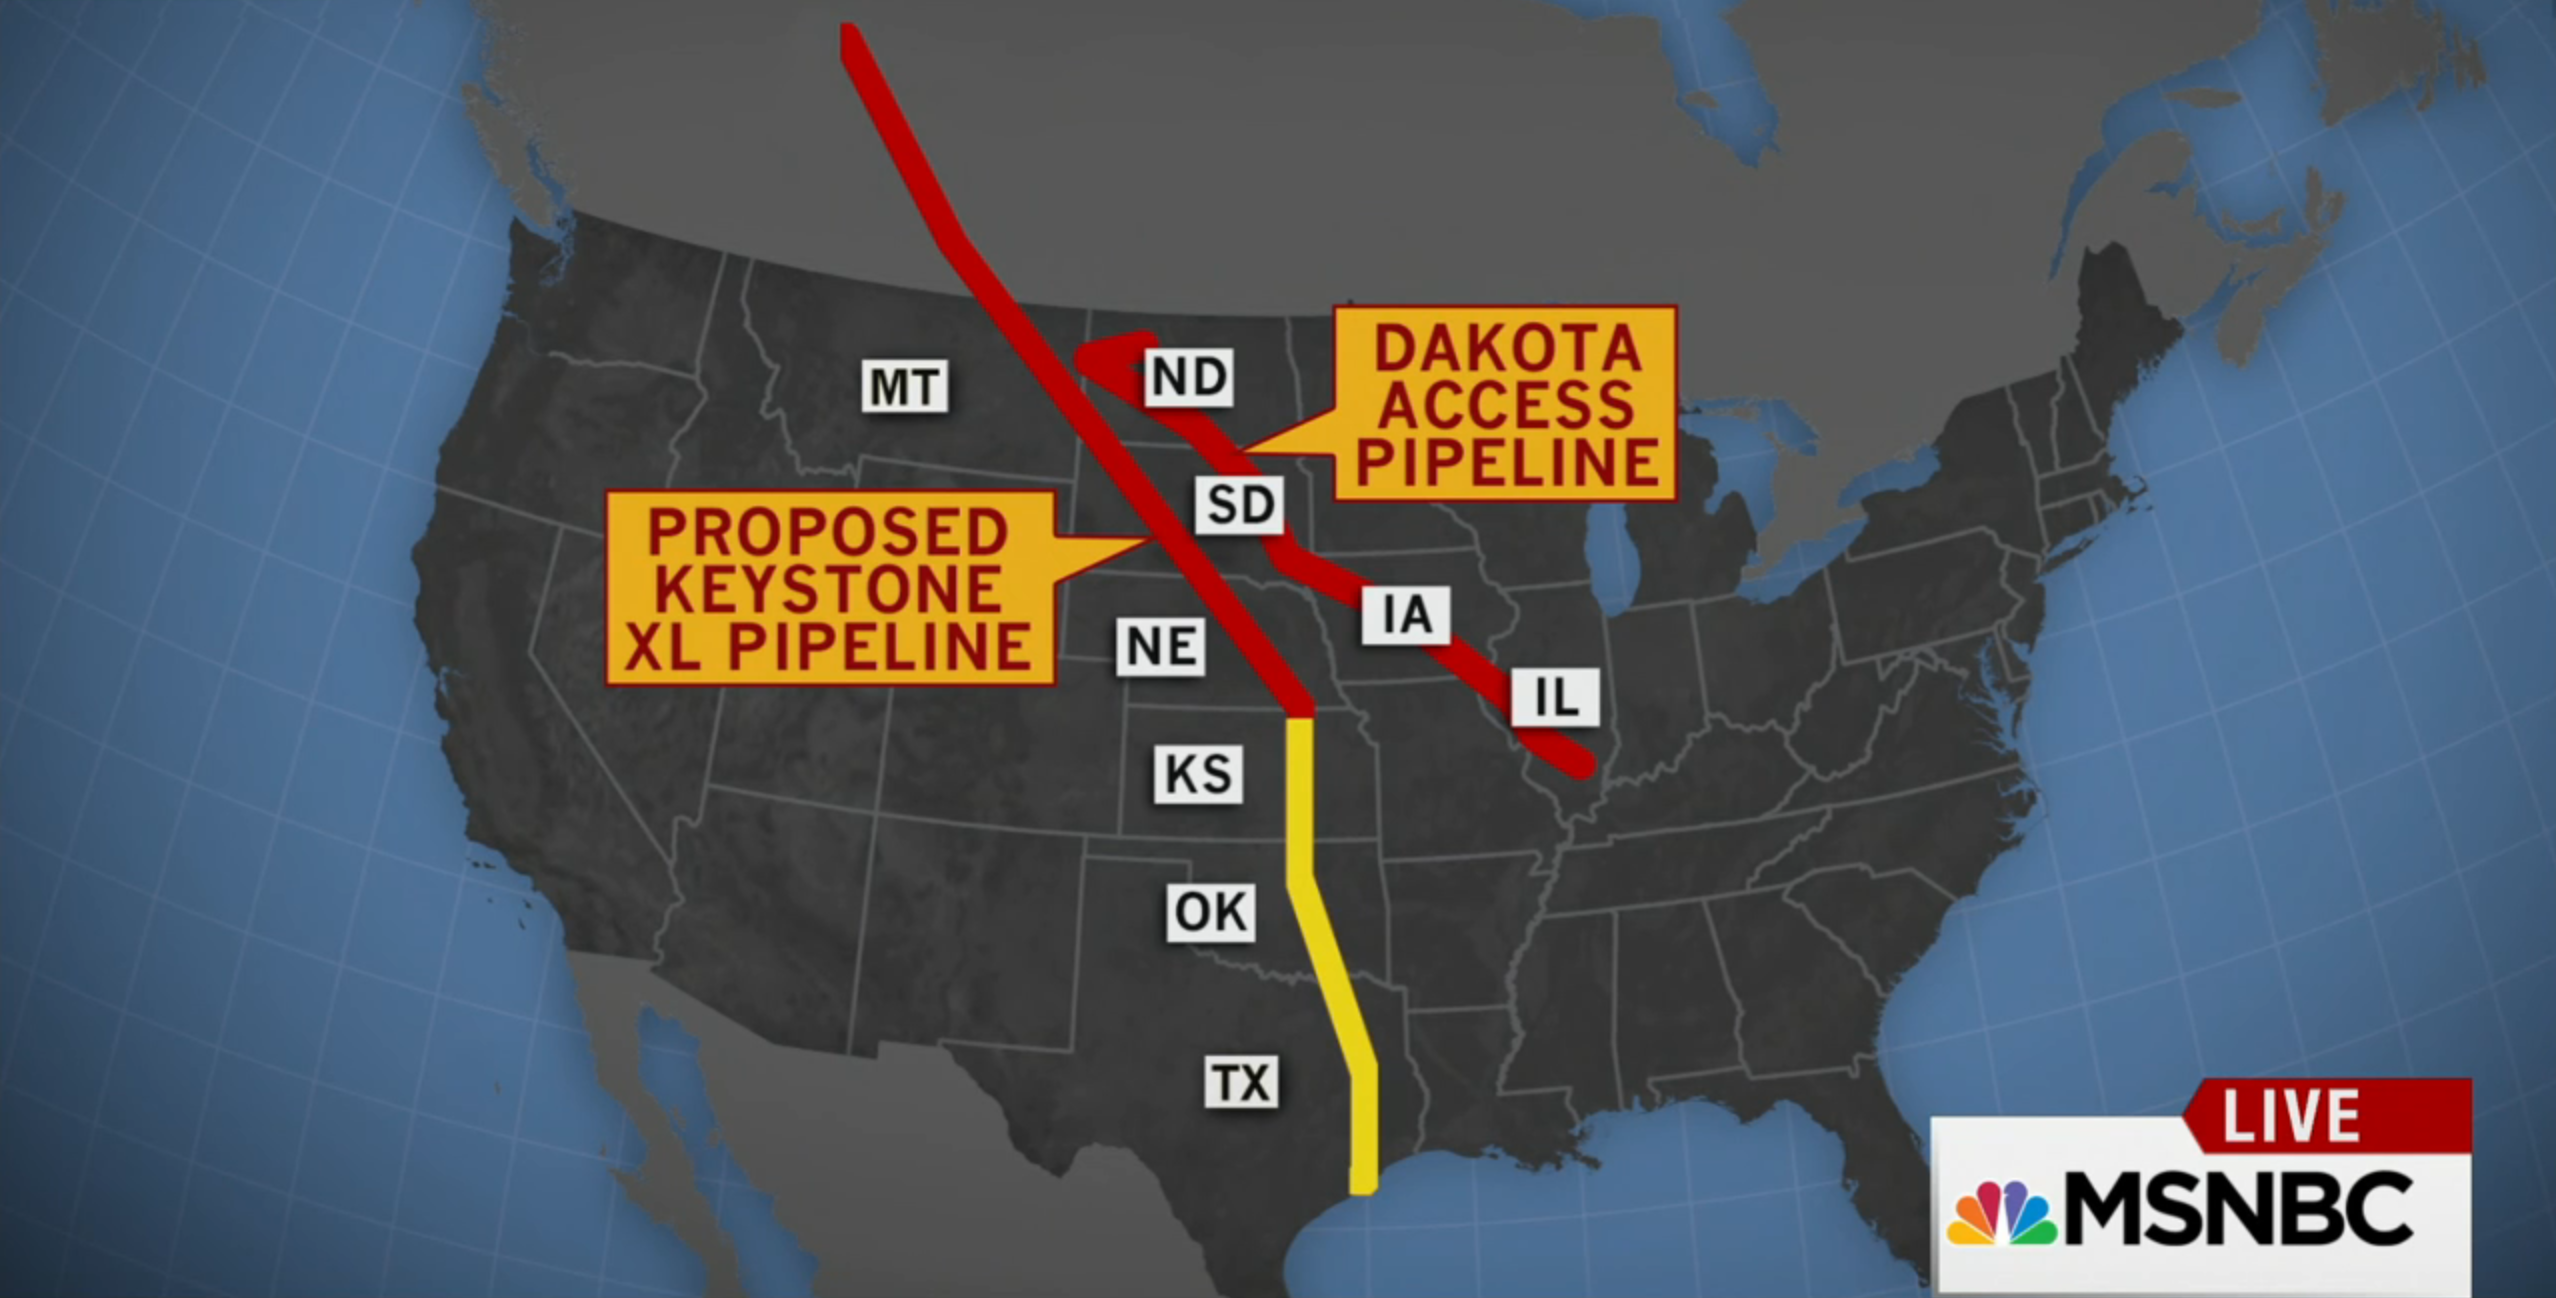 Proposed Plans for Dakota Access Pipeline and Keystone XL Pipeline